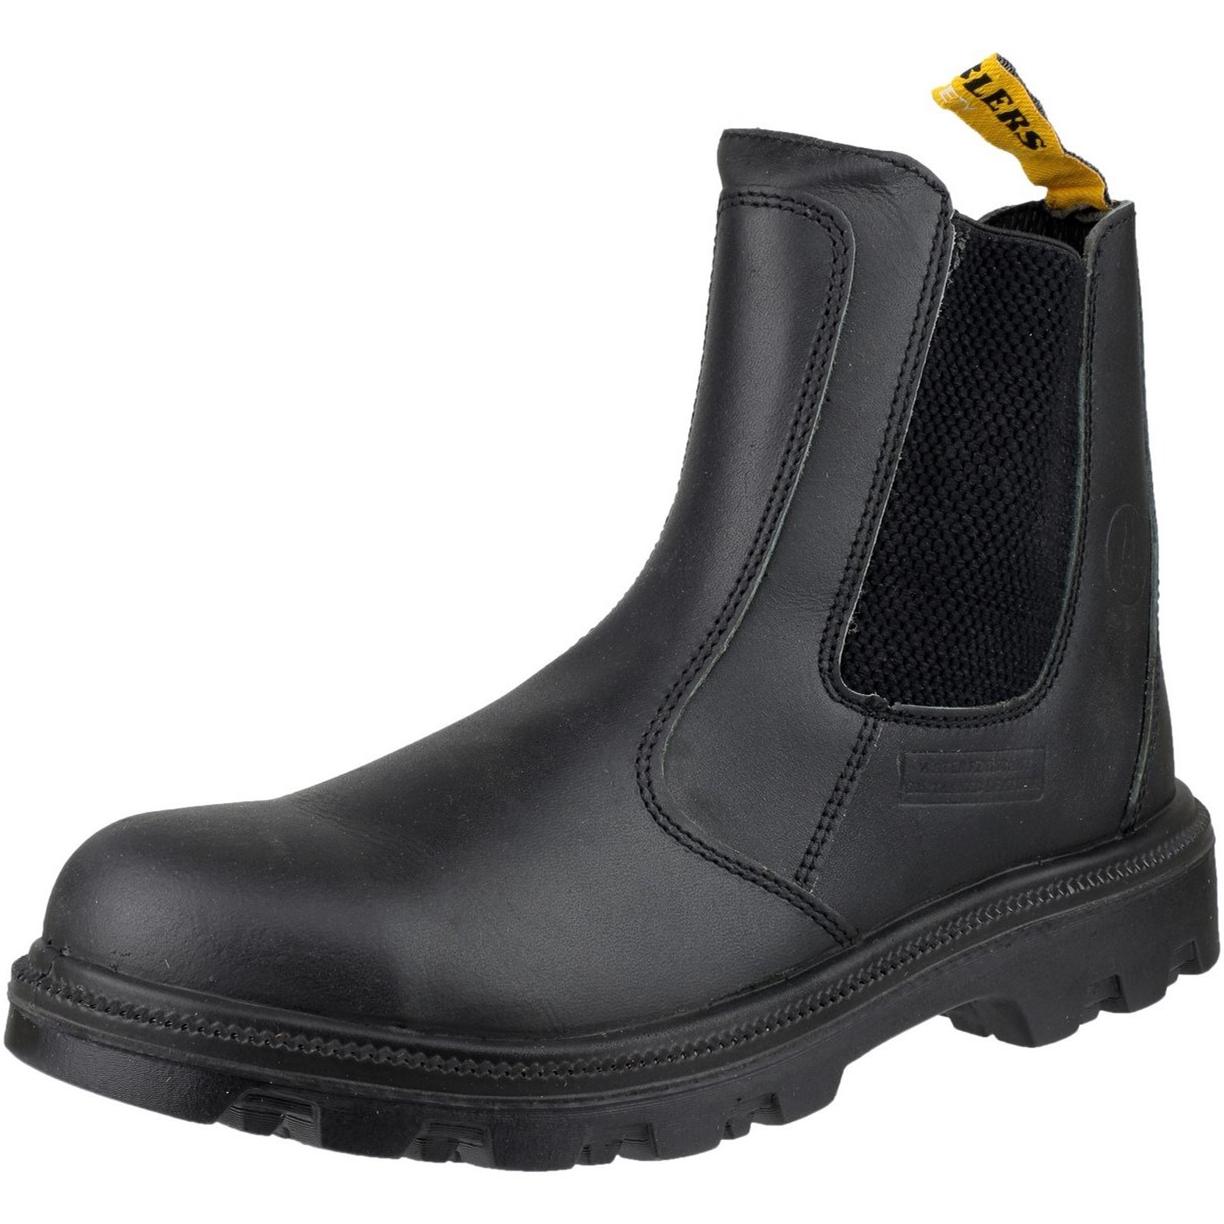 Amblers Safety FS129 Water Resistant Pull on Safety Dealer Boot